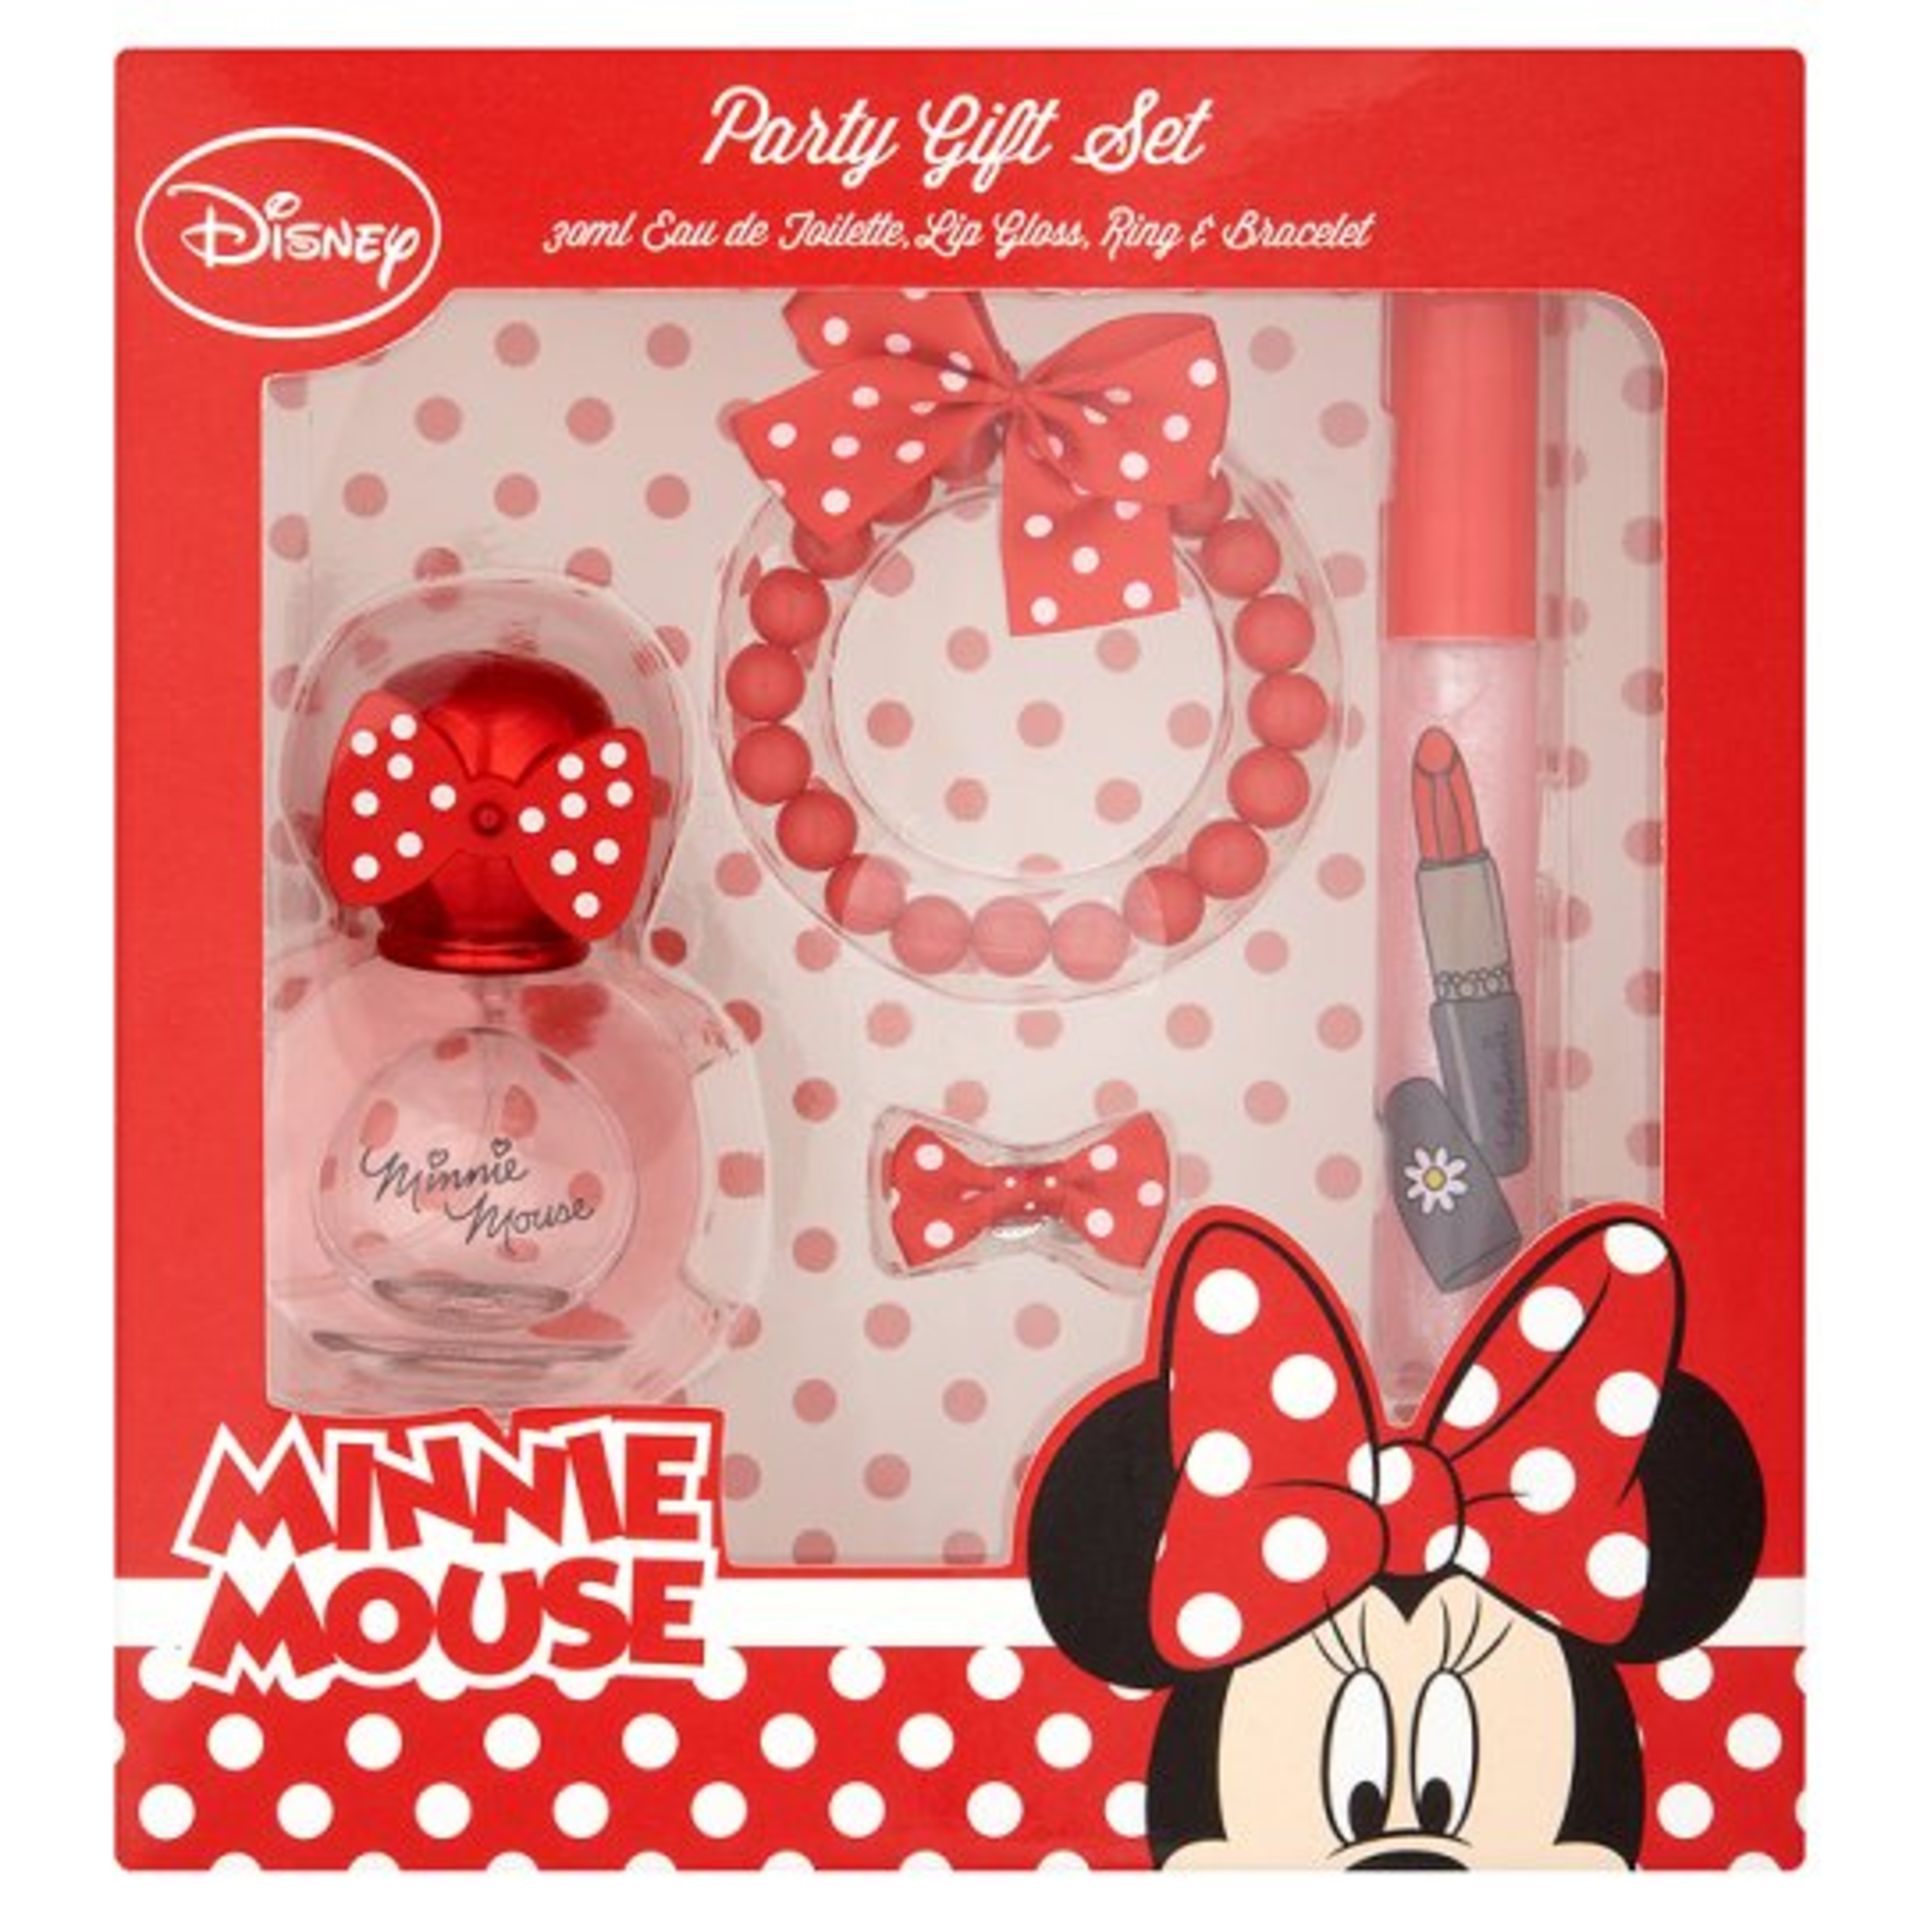 V Grade B Minnie Mouse party gift set